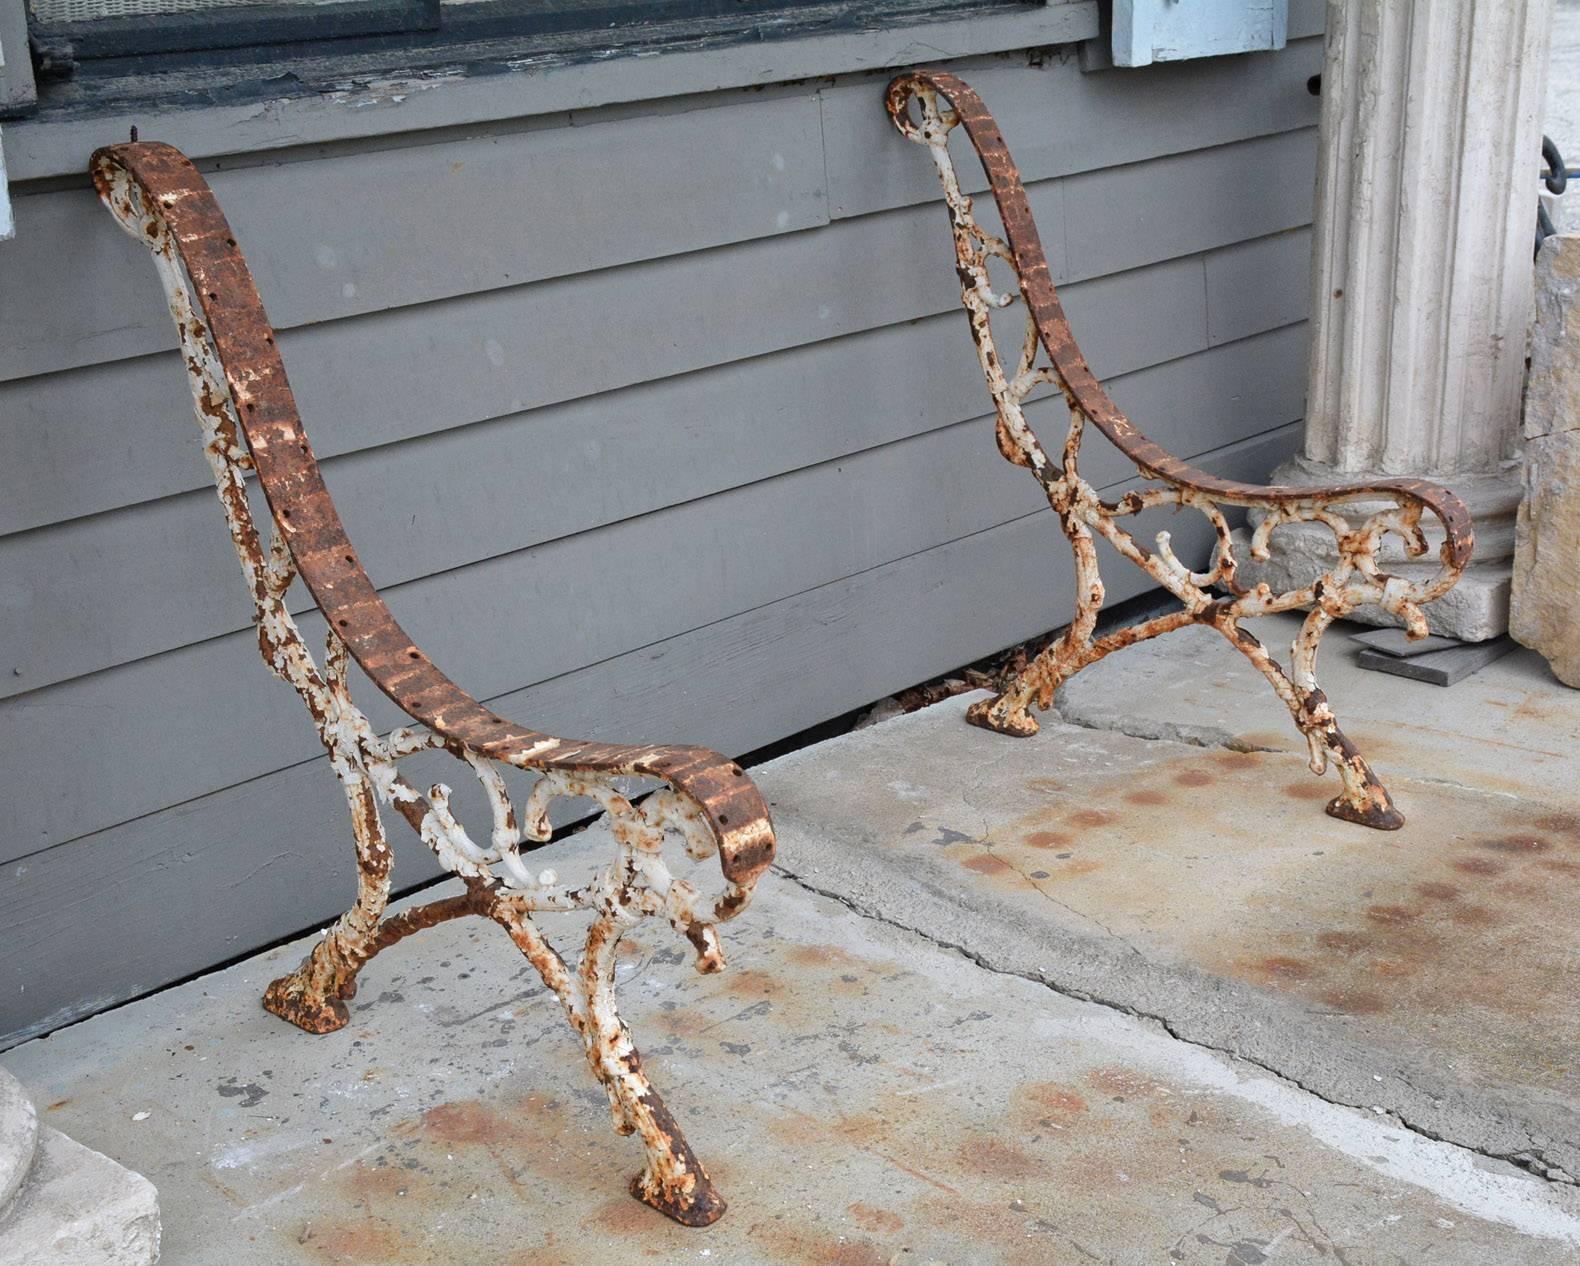 Pair of Egyptian Revival cast iron garden bench braces with legs that will support spaced and narrow wood boards for seating and back. There are screw holes for attaching the boards. The supports have original rusted paint.

Slats can be installed